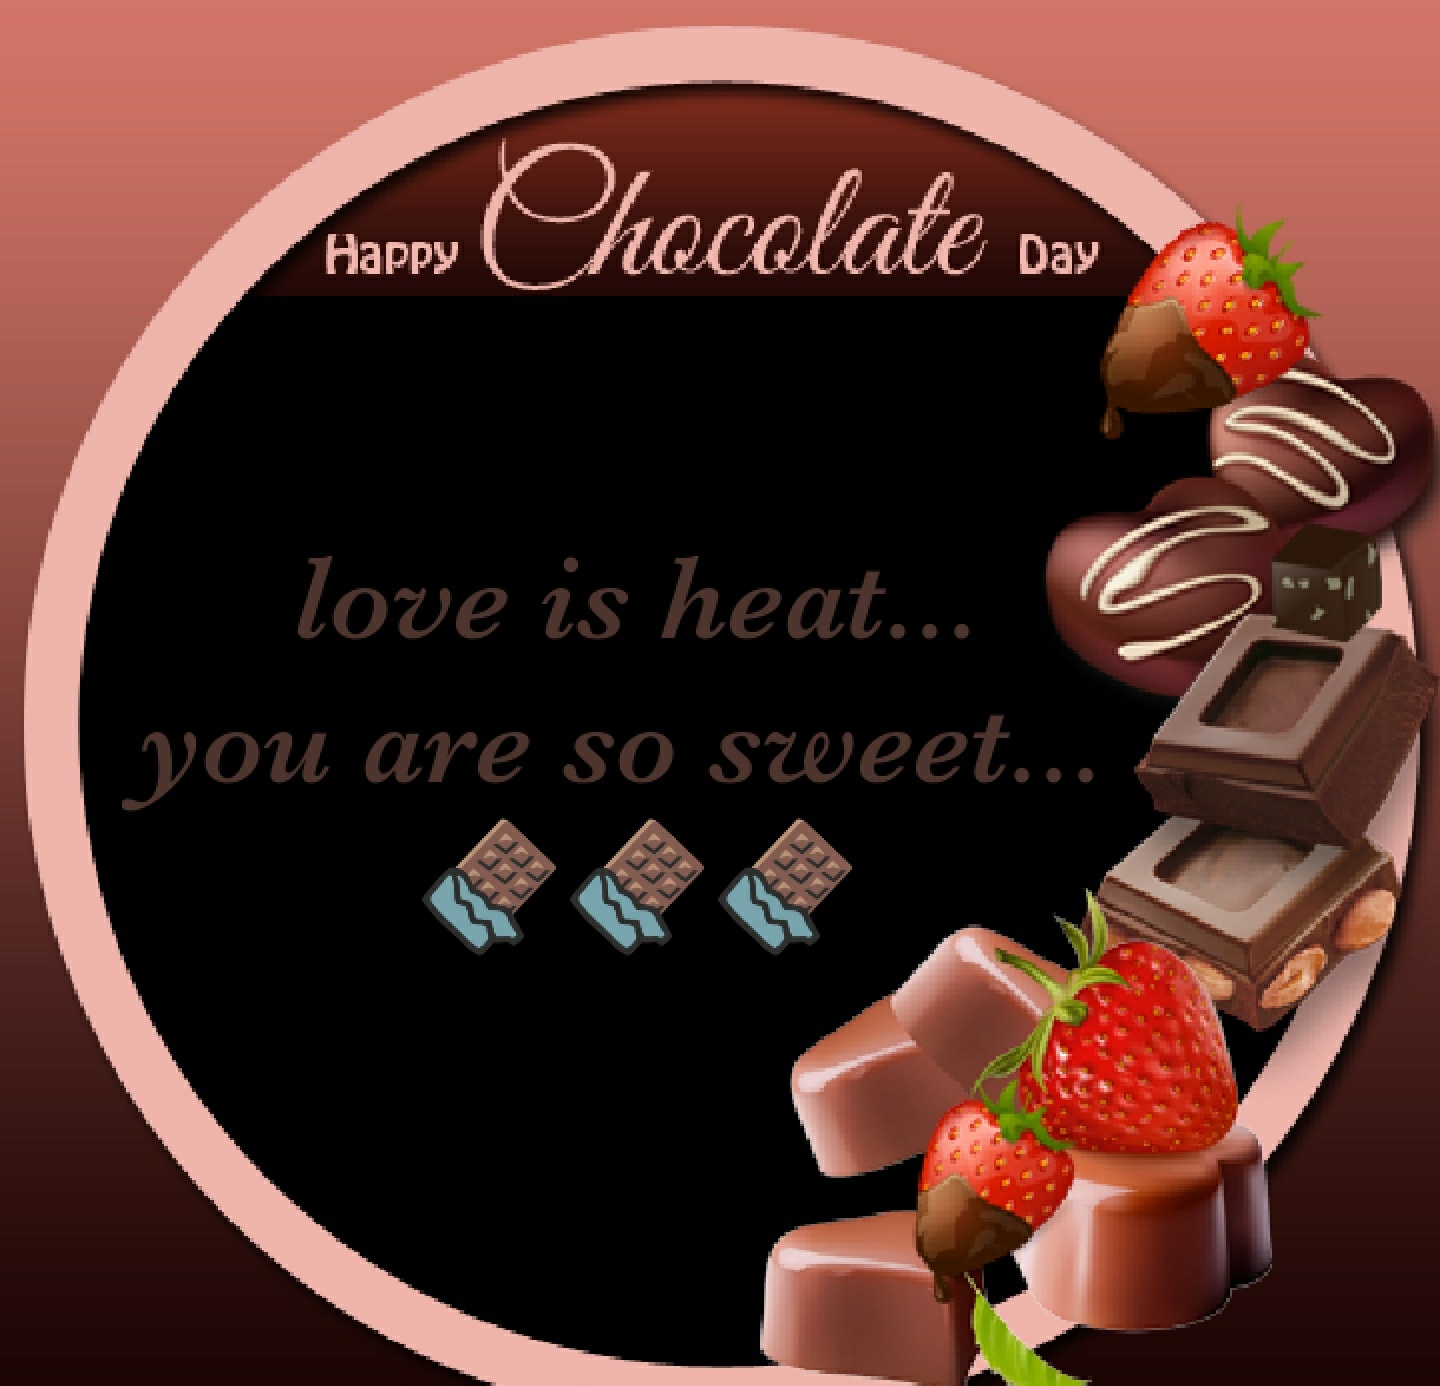 Happy Chocolate Day 2019 Chocolate Day Images Wallpapers - Chocolate Day For Friend , HD Wallpaper & Backgrounds